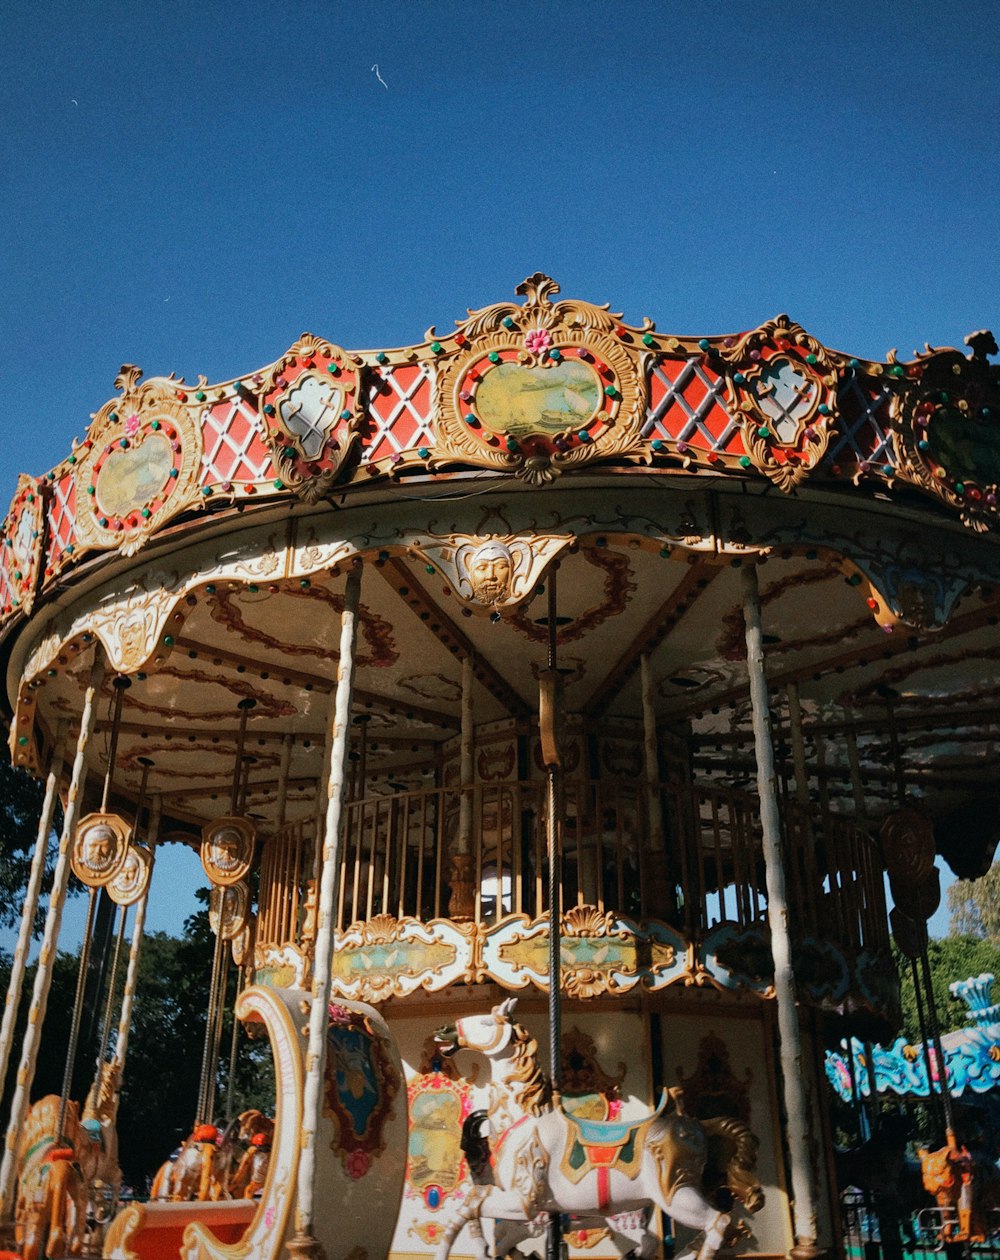 a merry go round with horses on a sunny day